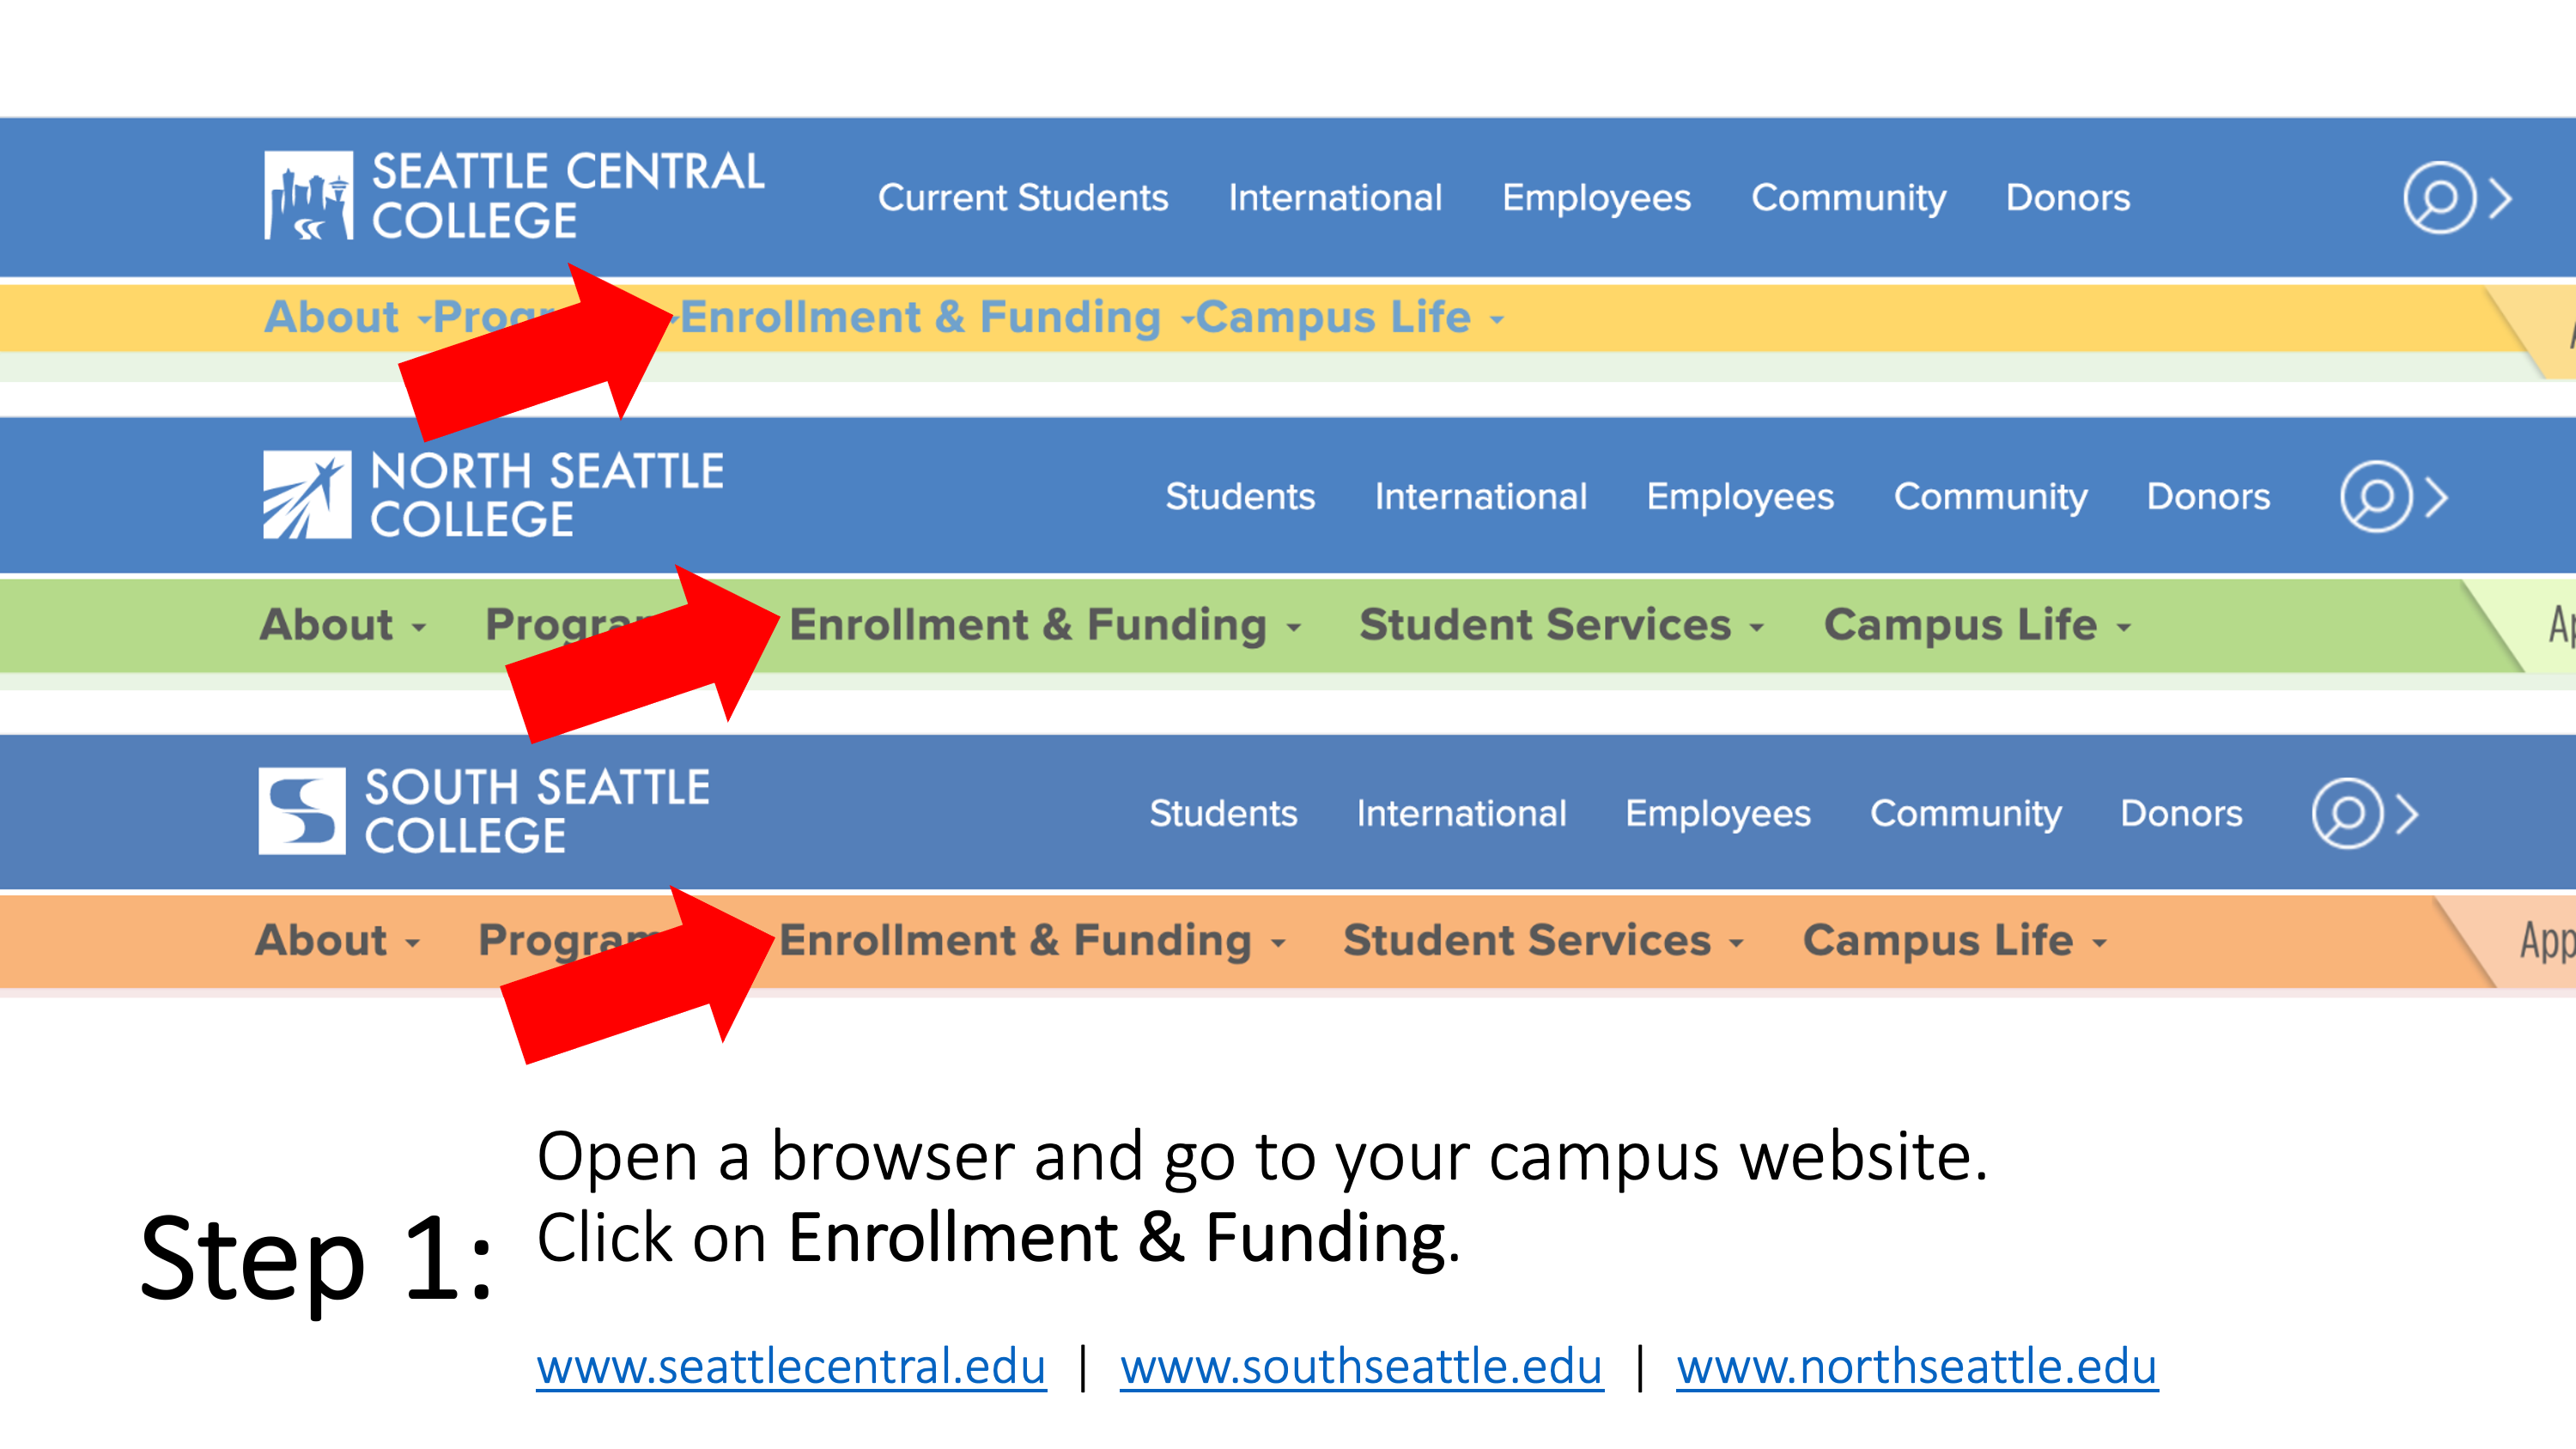 Open a browser and go to your campus website.  Click on Enrollment & Funding. www.seattlecentral.edu , www.southseattle.edu , or www.northseattle.edu.